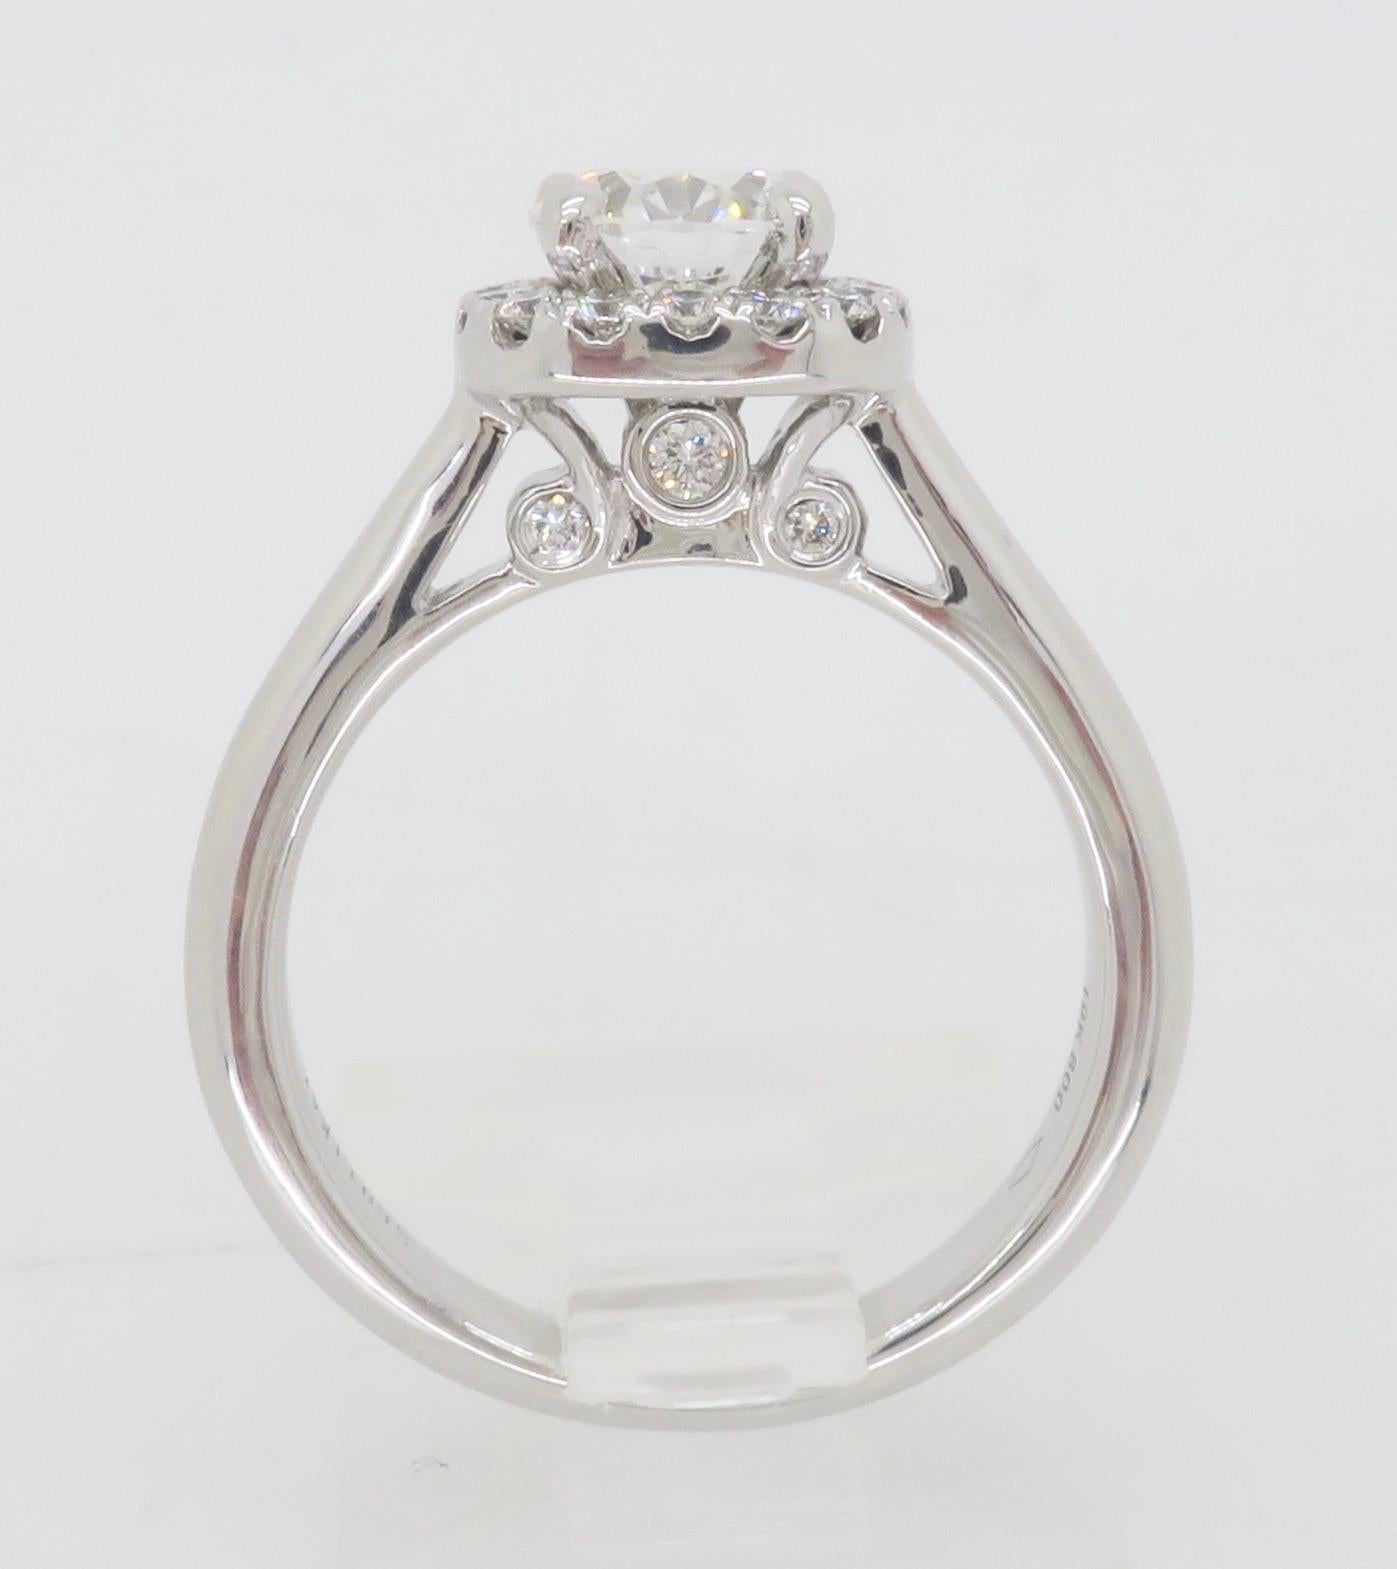 GIA Certified Round Brilliant Cut Diamond in a Stunning Scott Kay Halo Setting  For Sale 7